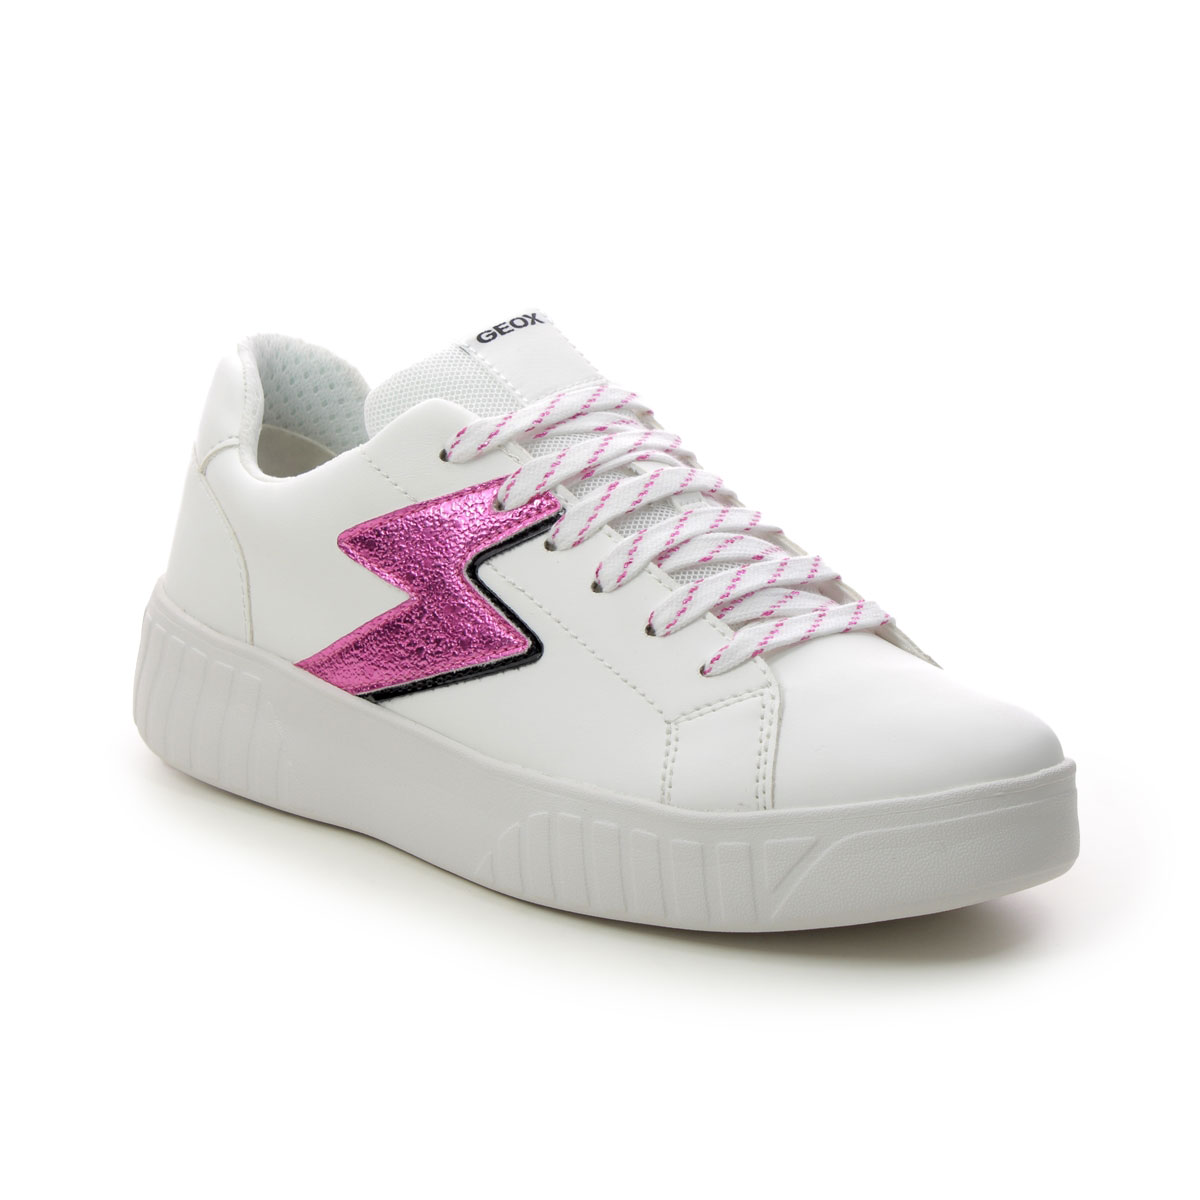 Geox Mikiroshi Lace White Pink Kids girls trainers J45DVA-C0563 in a Plain Man-made in Size 36